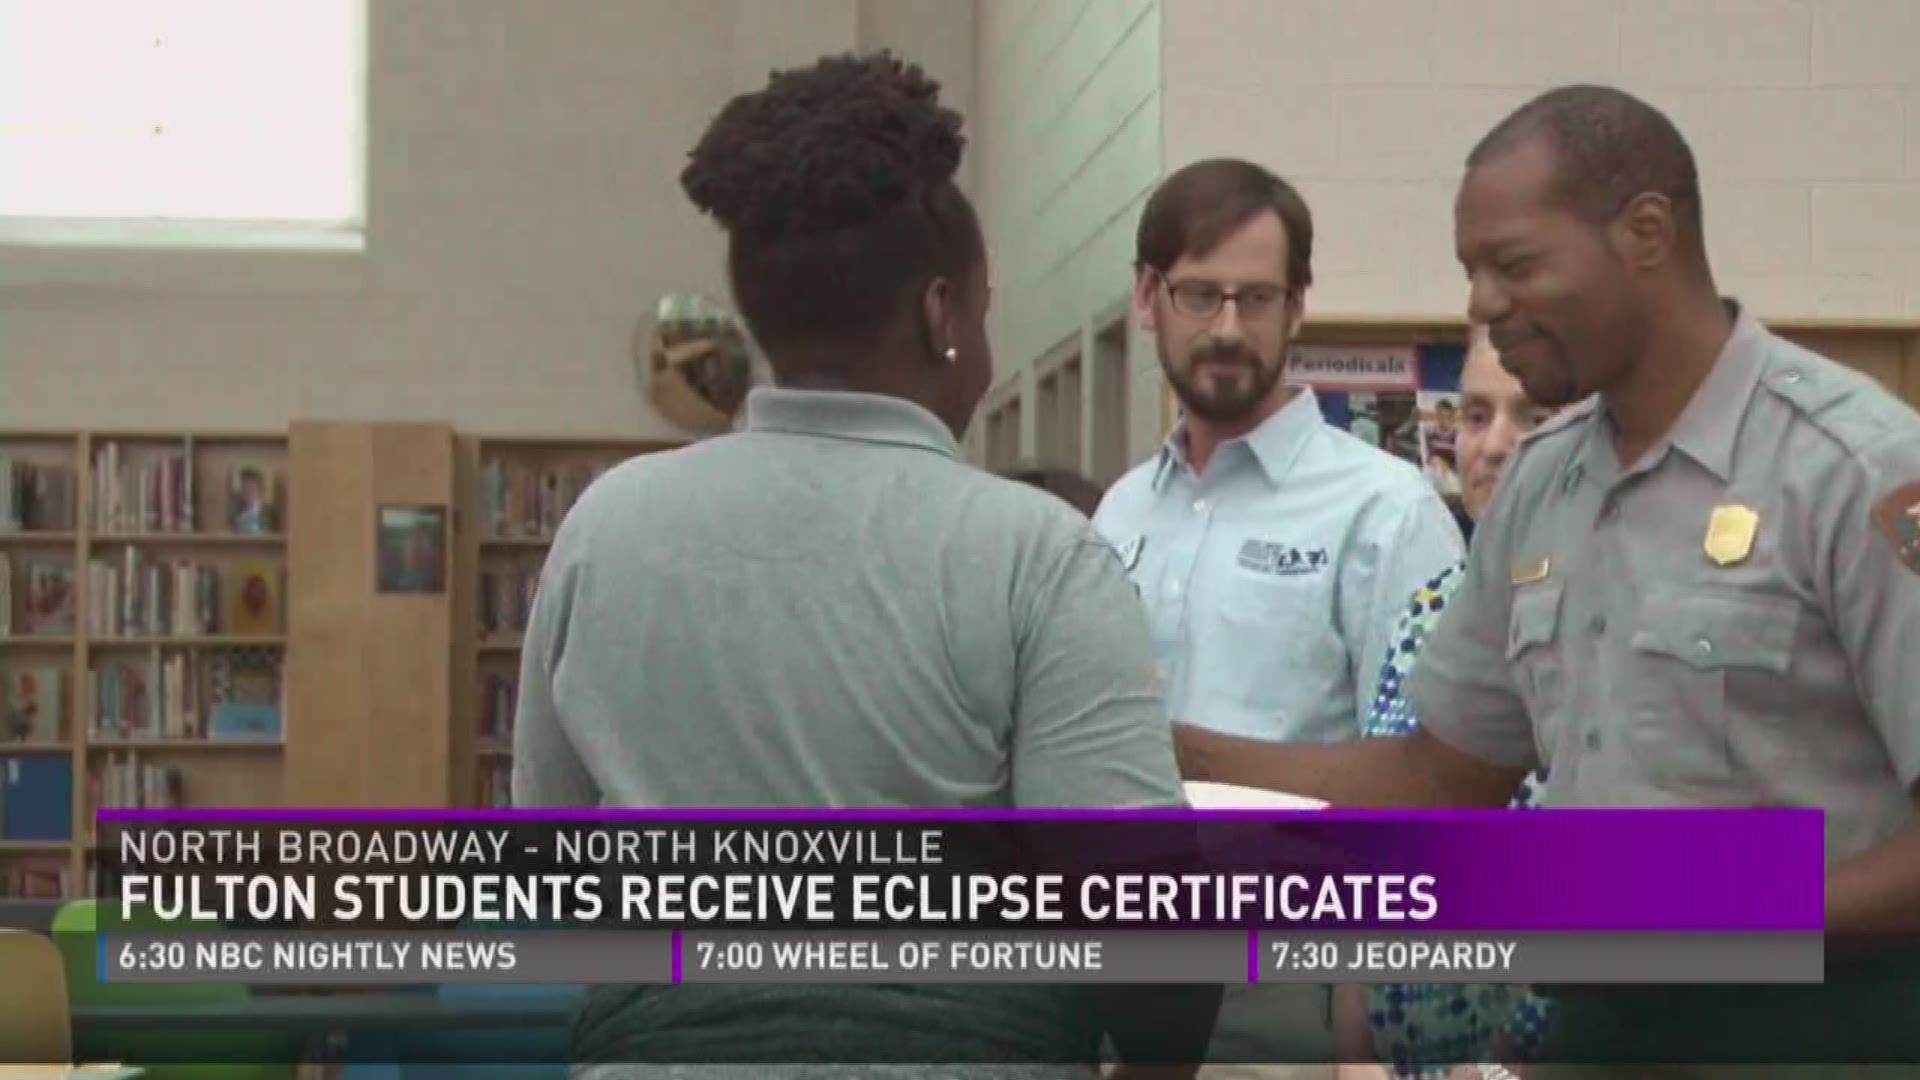 Aug. 25, 2017: Tremont Institute leaders honored Fulton High School students who helped park rangers during the total solar eclipse at Cades Cove.